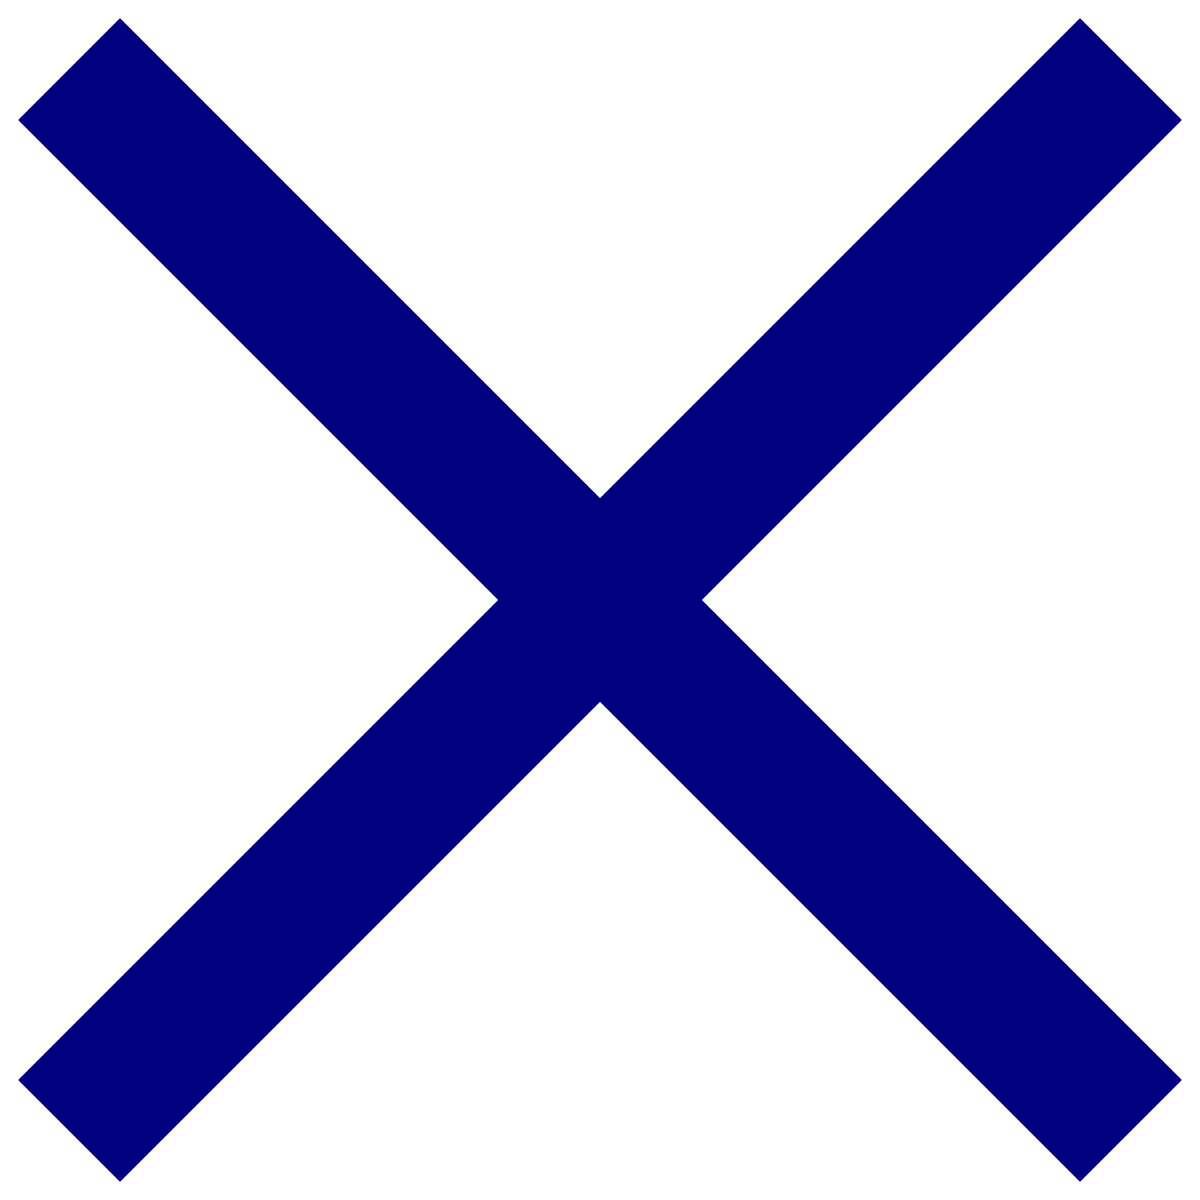 A warning sign or a shield with a red X mark.